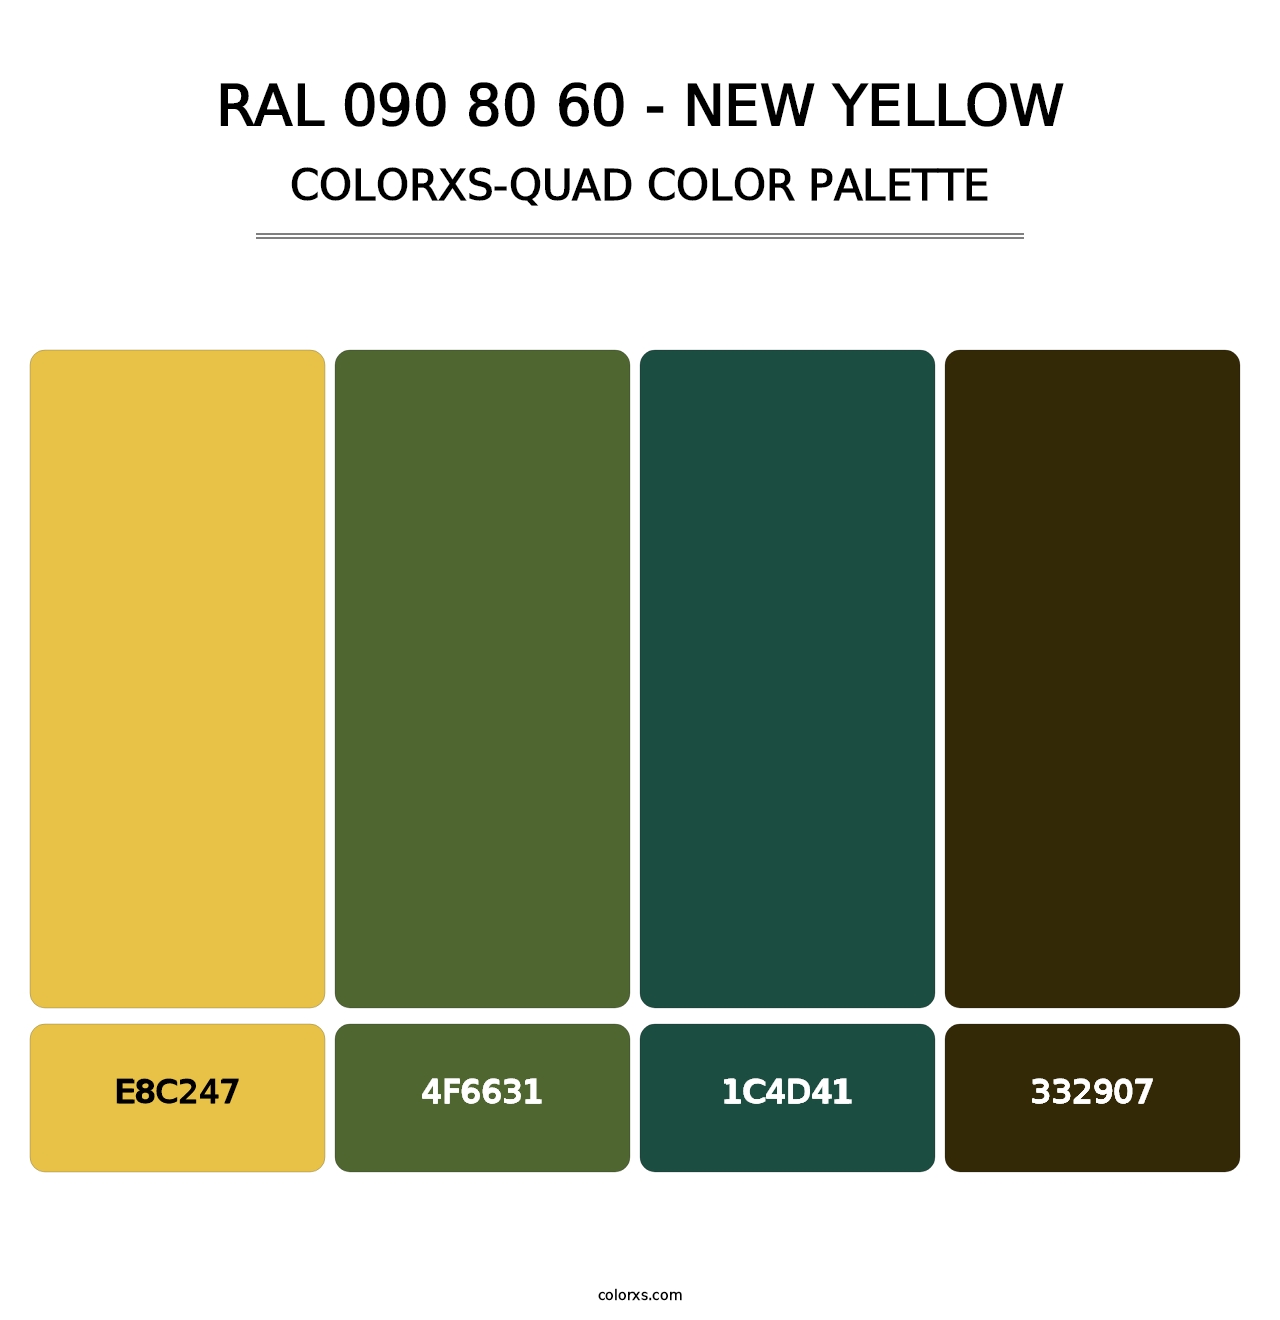 RAL 090 80 60 - New Yellow - Colorxs Quad Palette